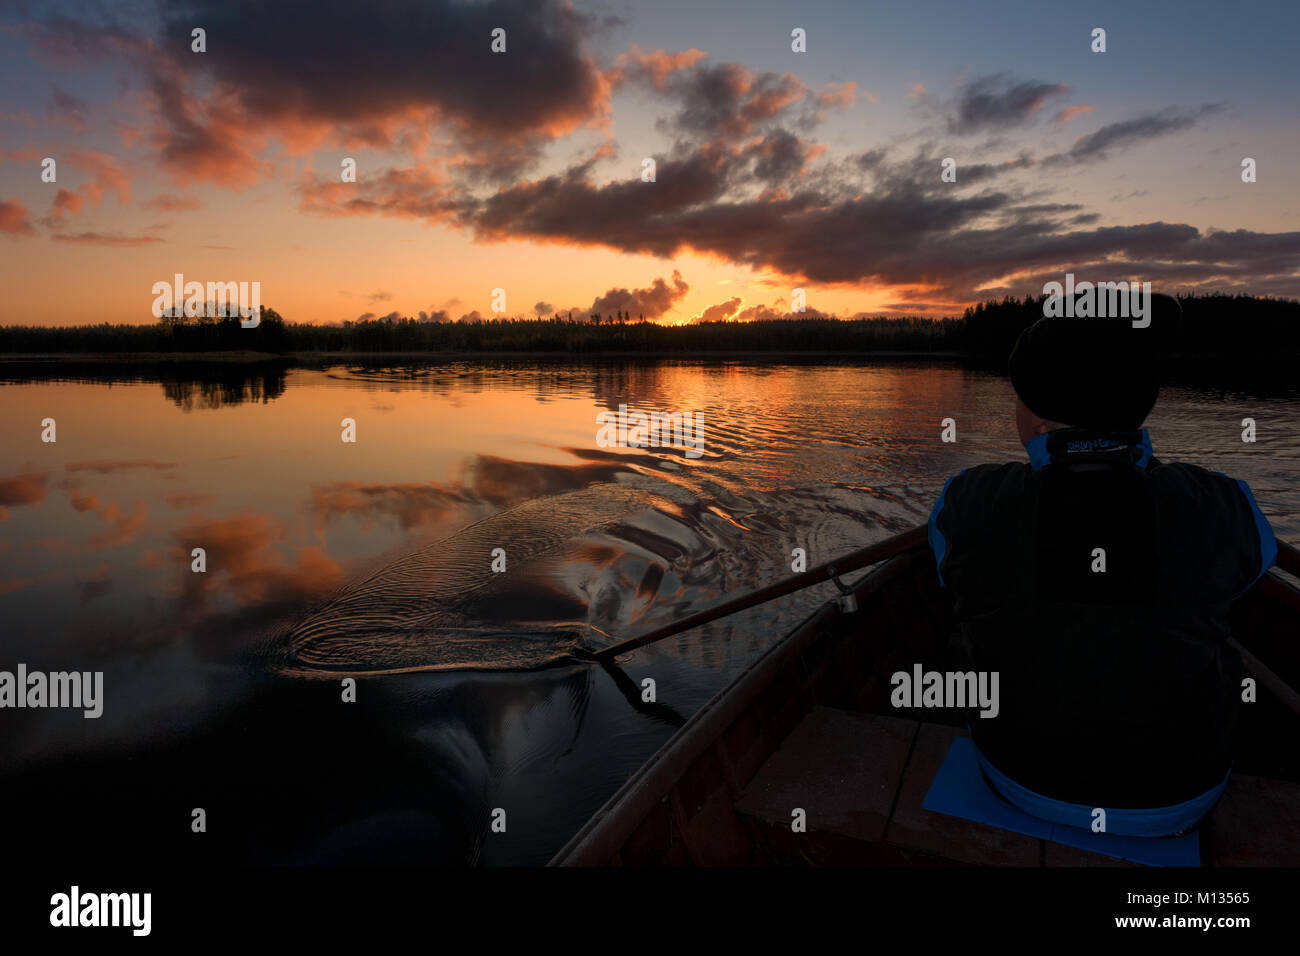 Finnish landscapes: Man rowing a row boat with oars on a calm lake in a beautiful sunrise, Finland Stock Photo